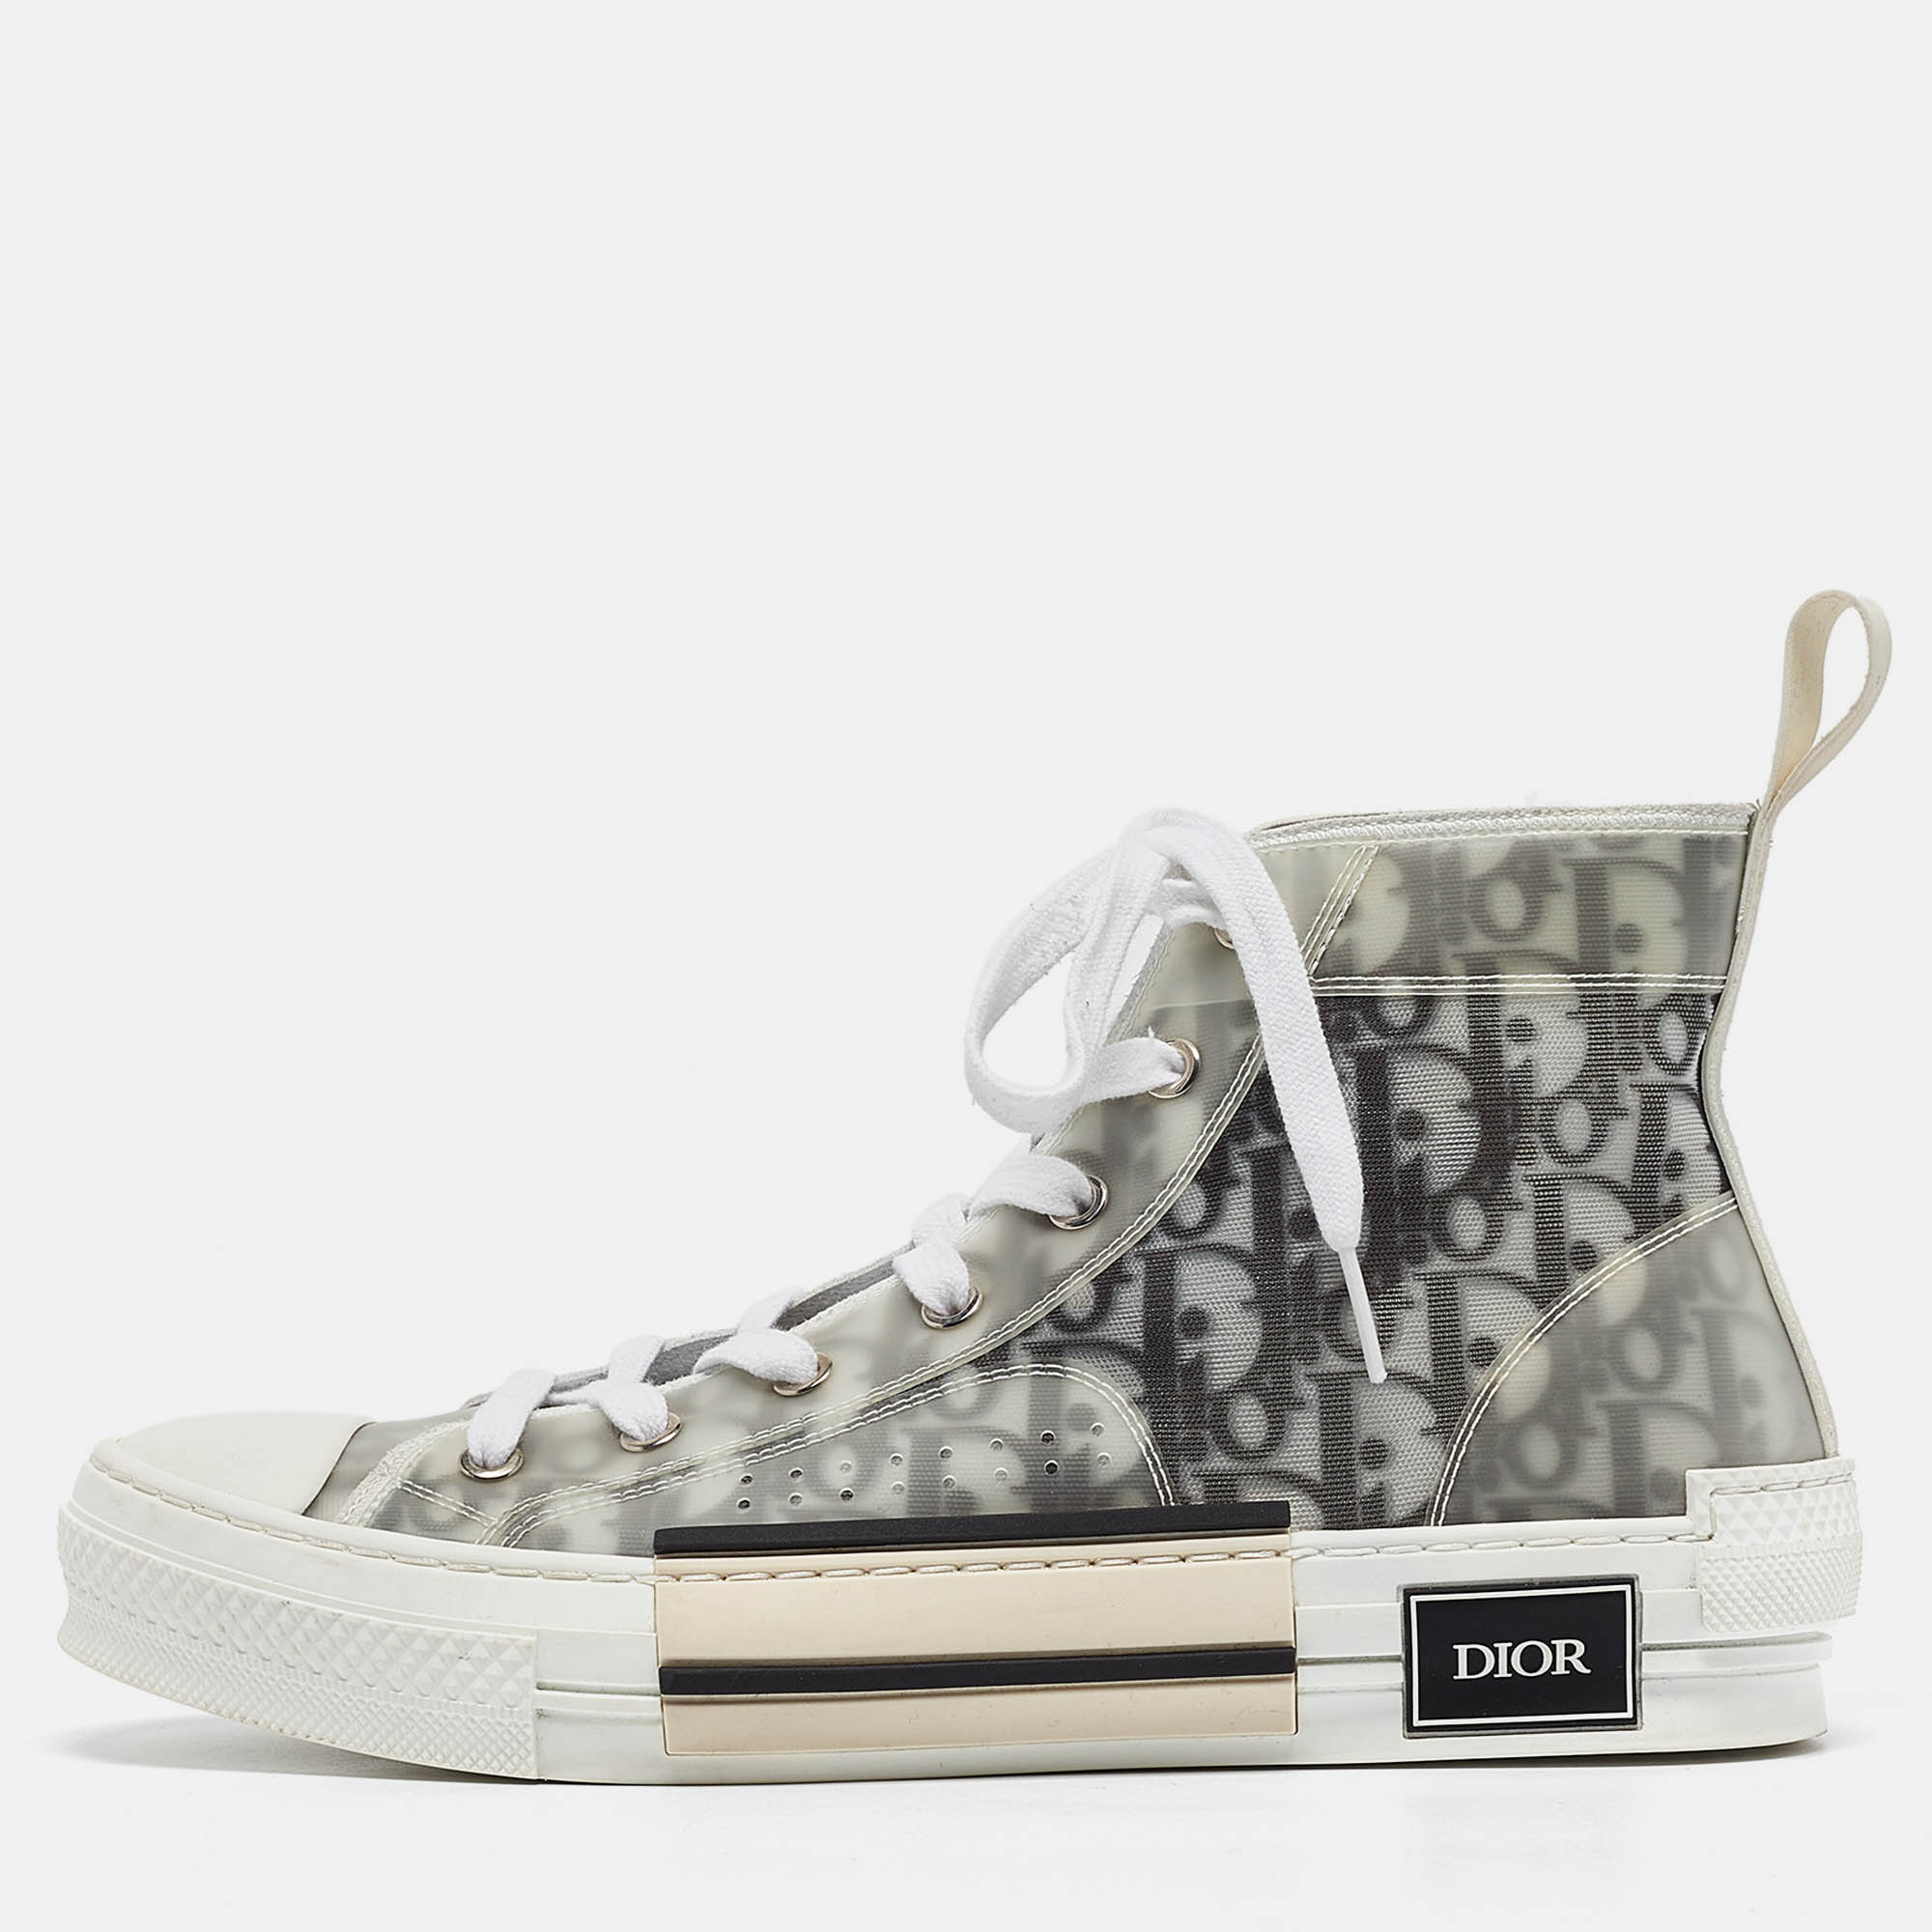 

Dior Grey/White PVC and Mesh B23 High Top Sneakers Size